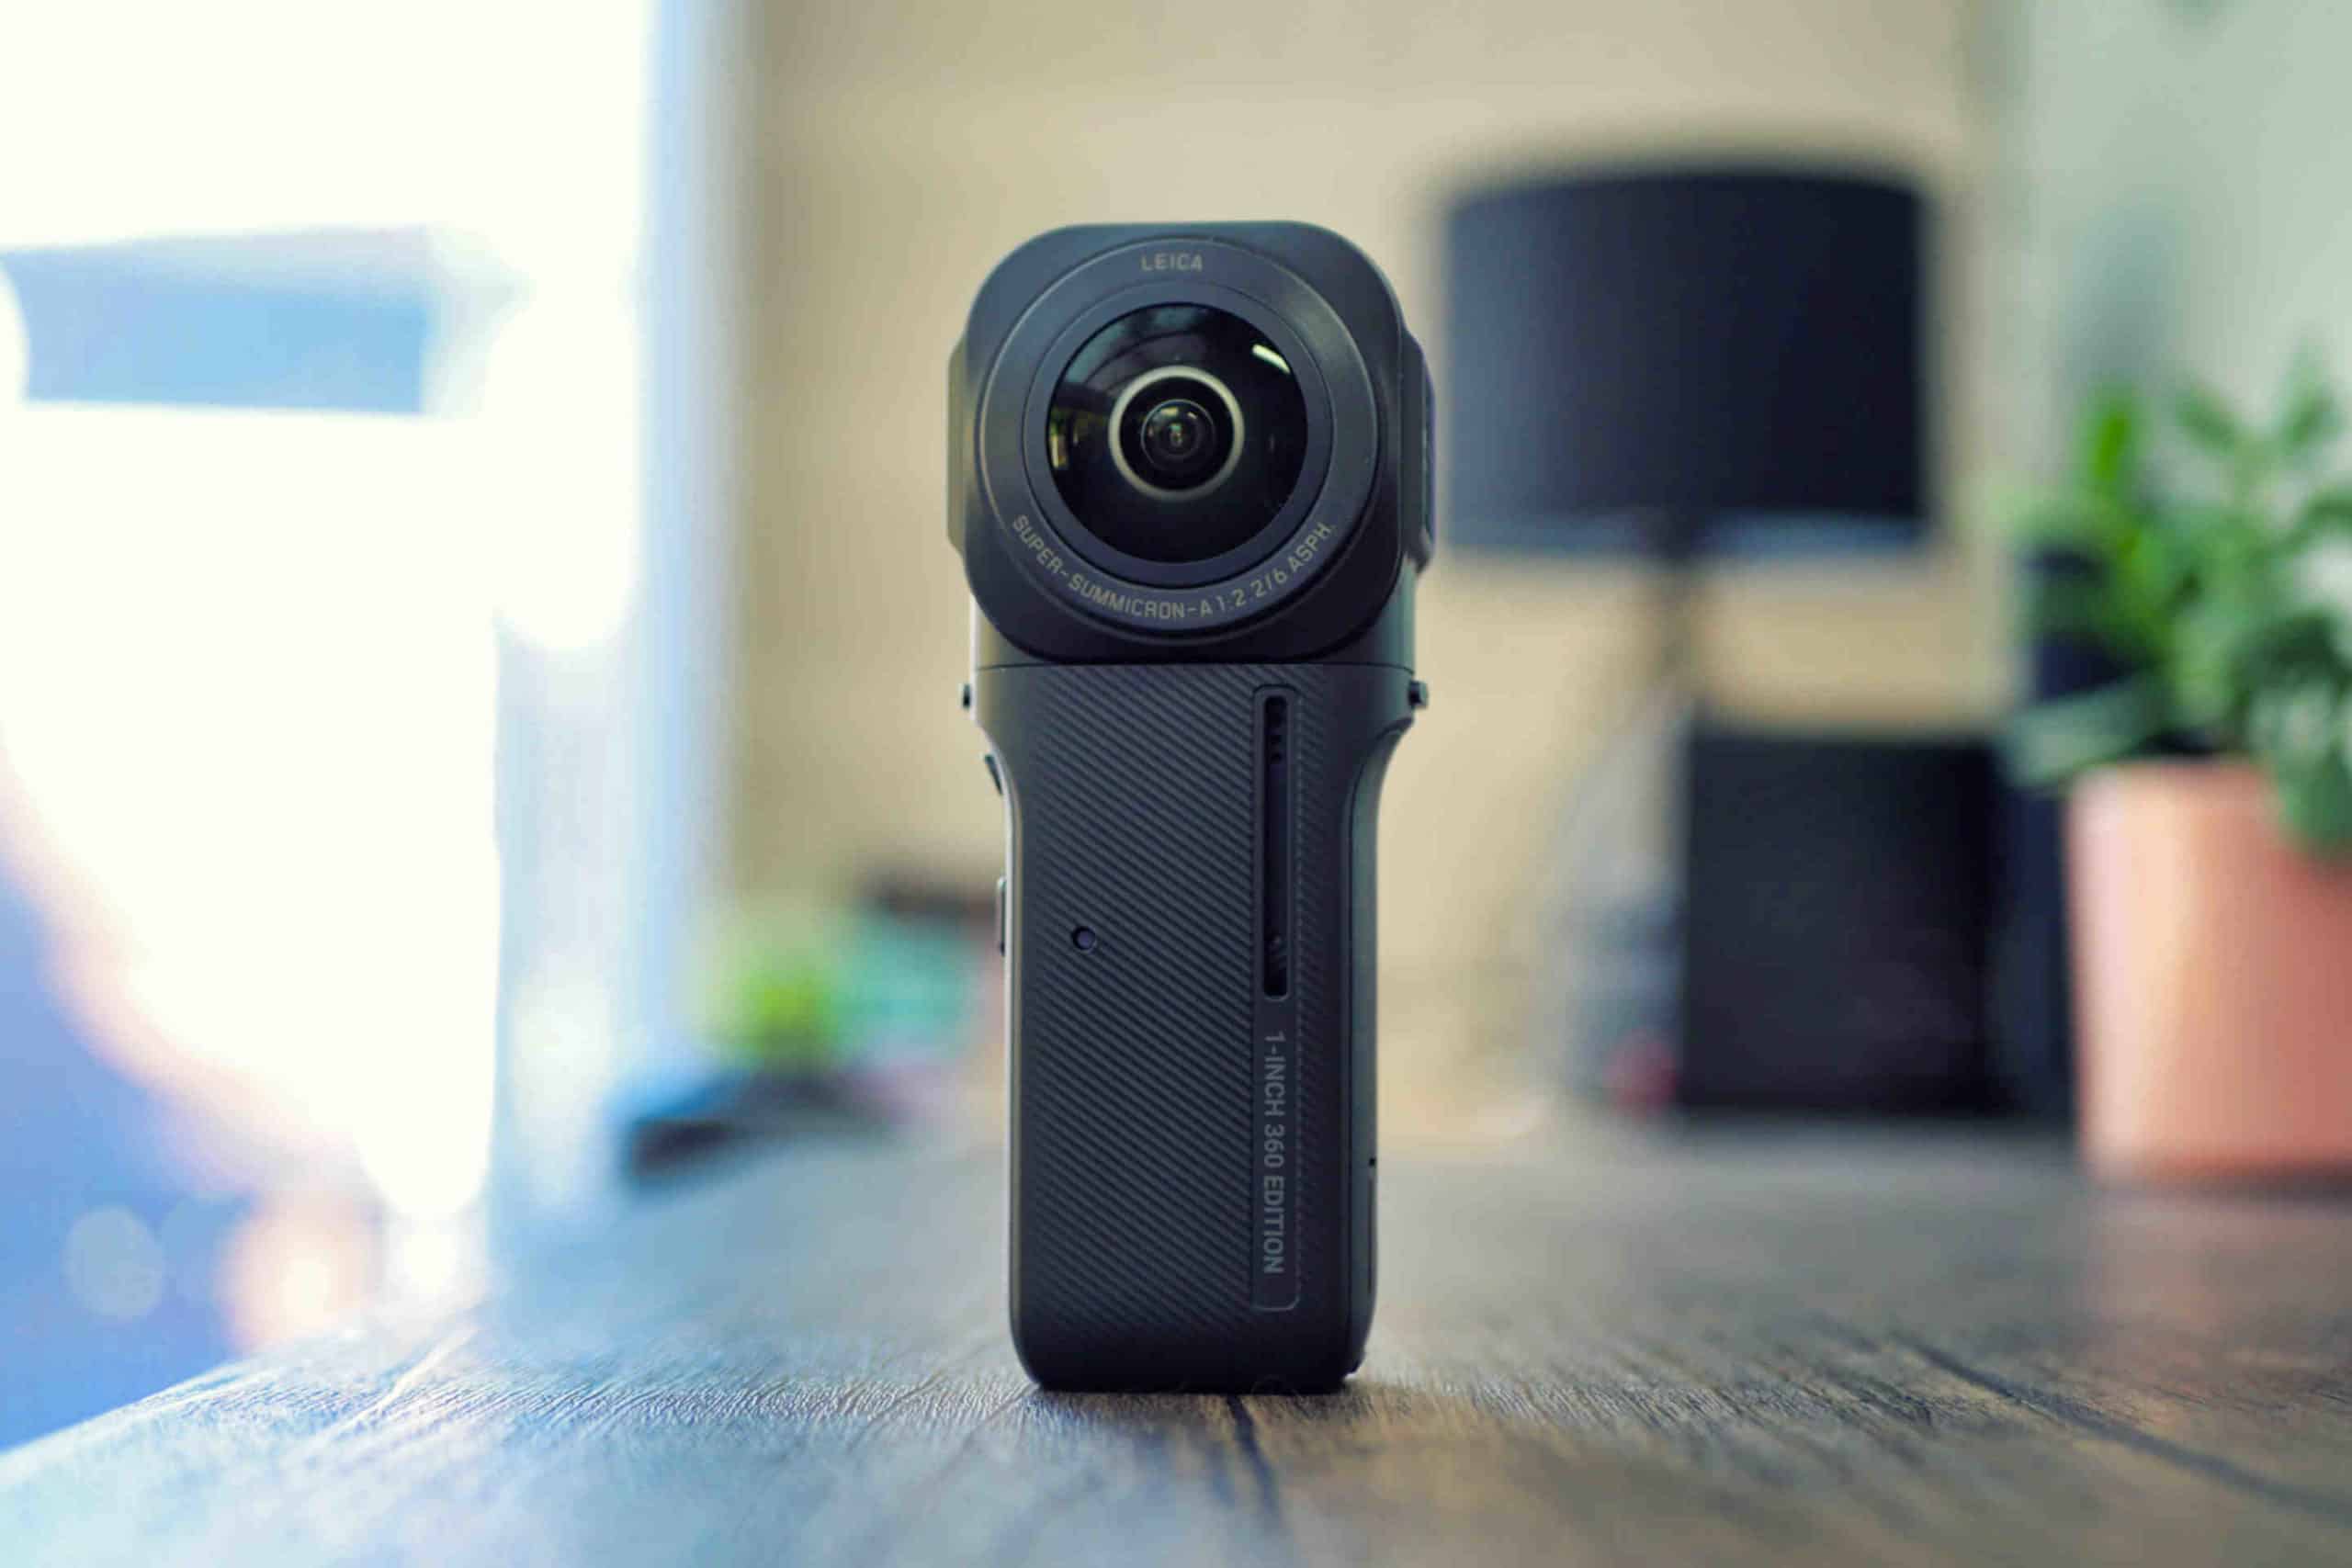 How long does insta360 take to ship?